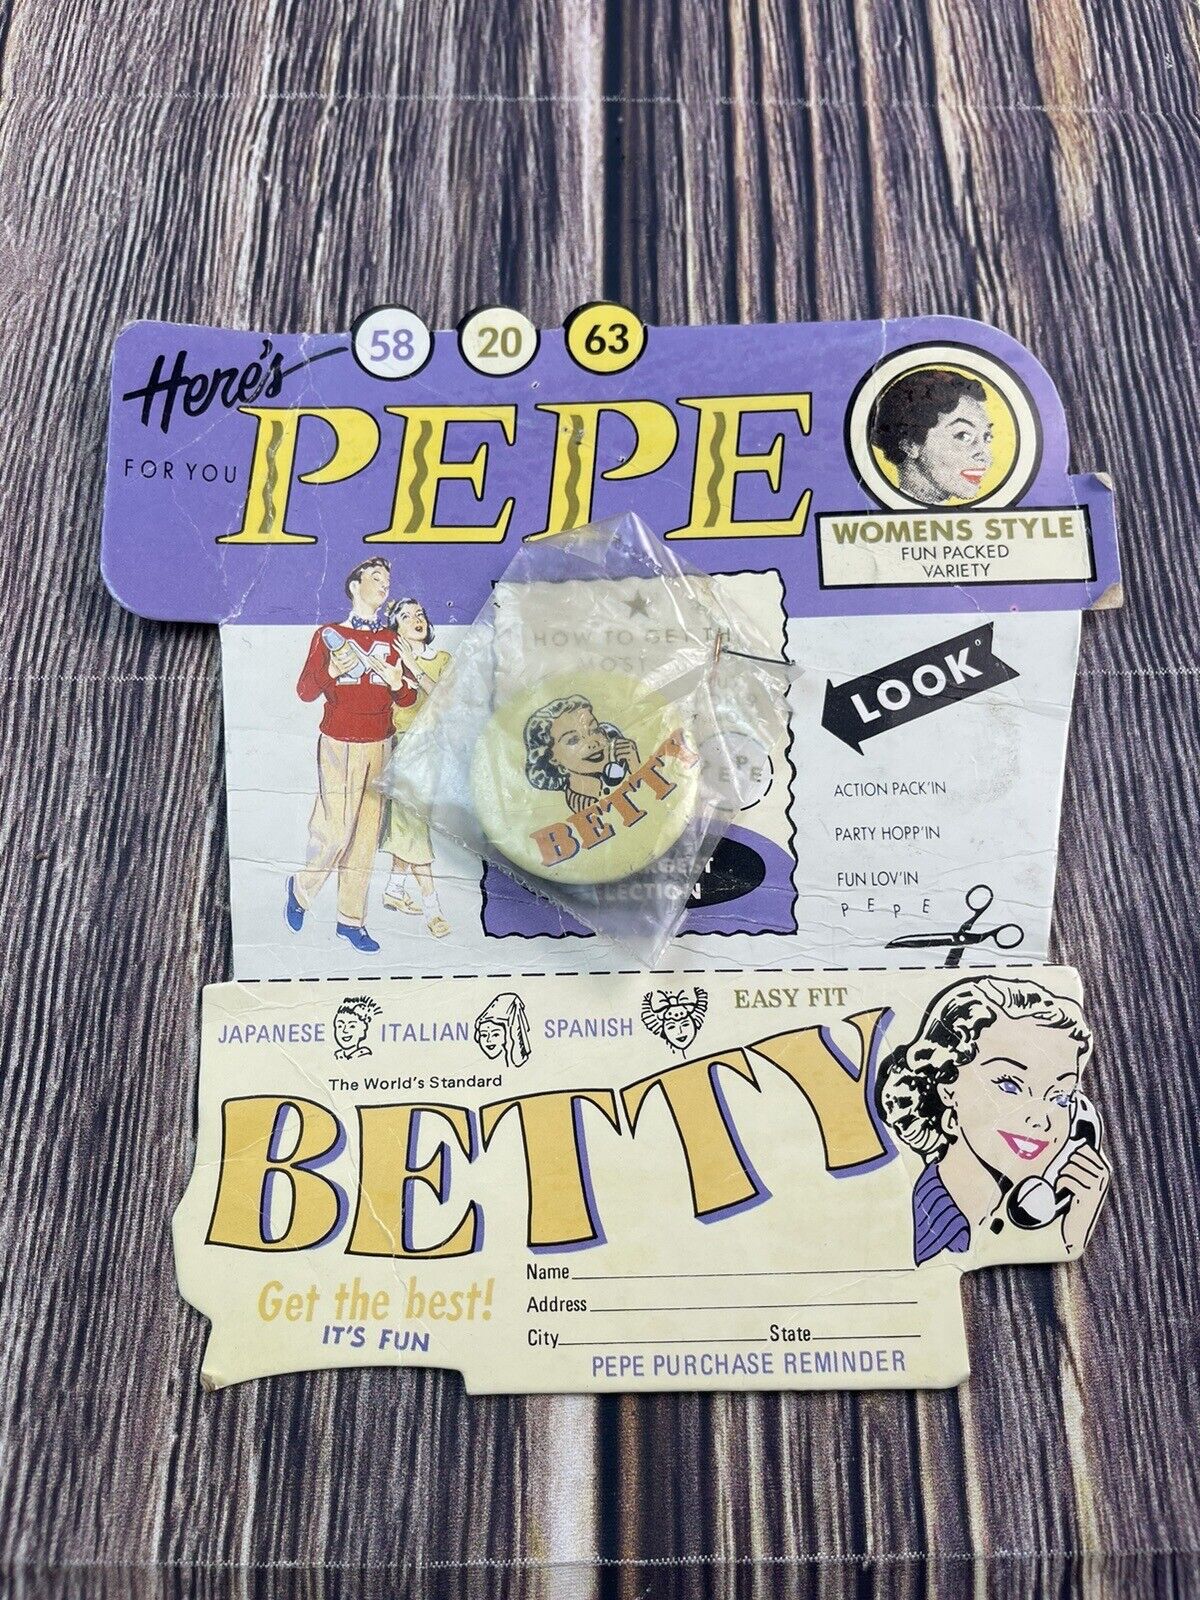 Vintage Pepe Jeans Promotional Betty Pin 